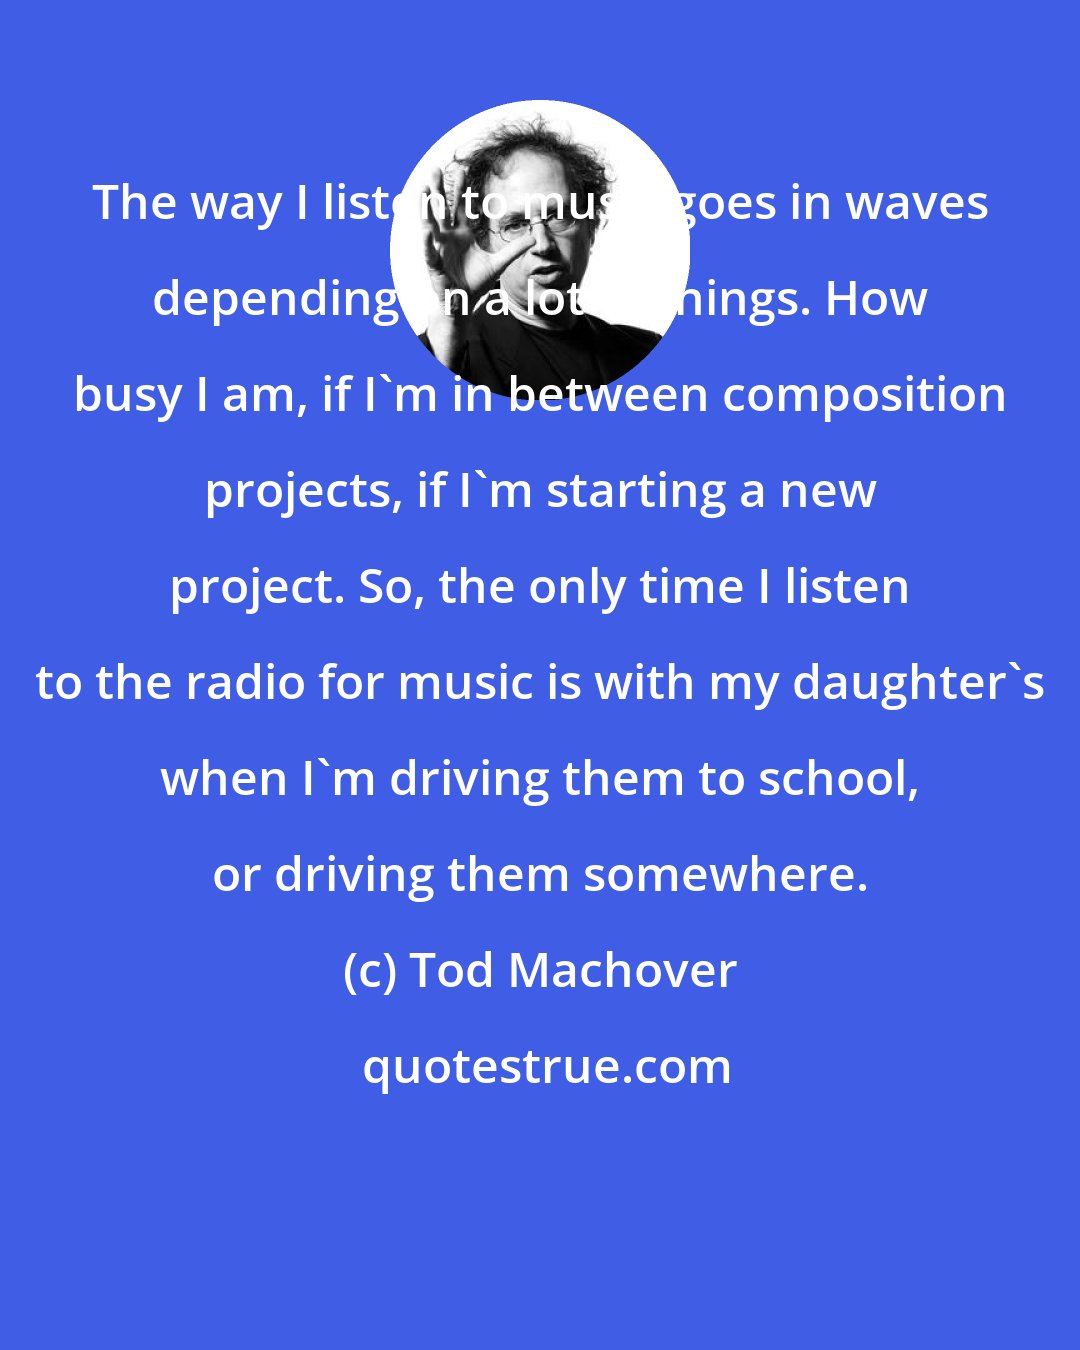 Tod Machover: The way I listen to music goes in waves depending on a lot of things. How busy I am, if I'm in between composition projects, if I'm starting a new project. So, the only time I listen to the radio for music is with my daughter's when I'm driving them to school, or driving them somewhere.